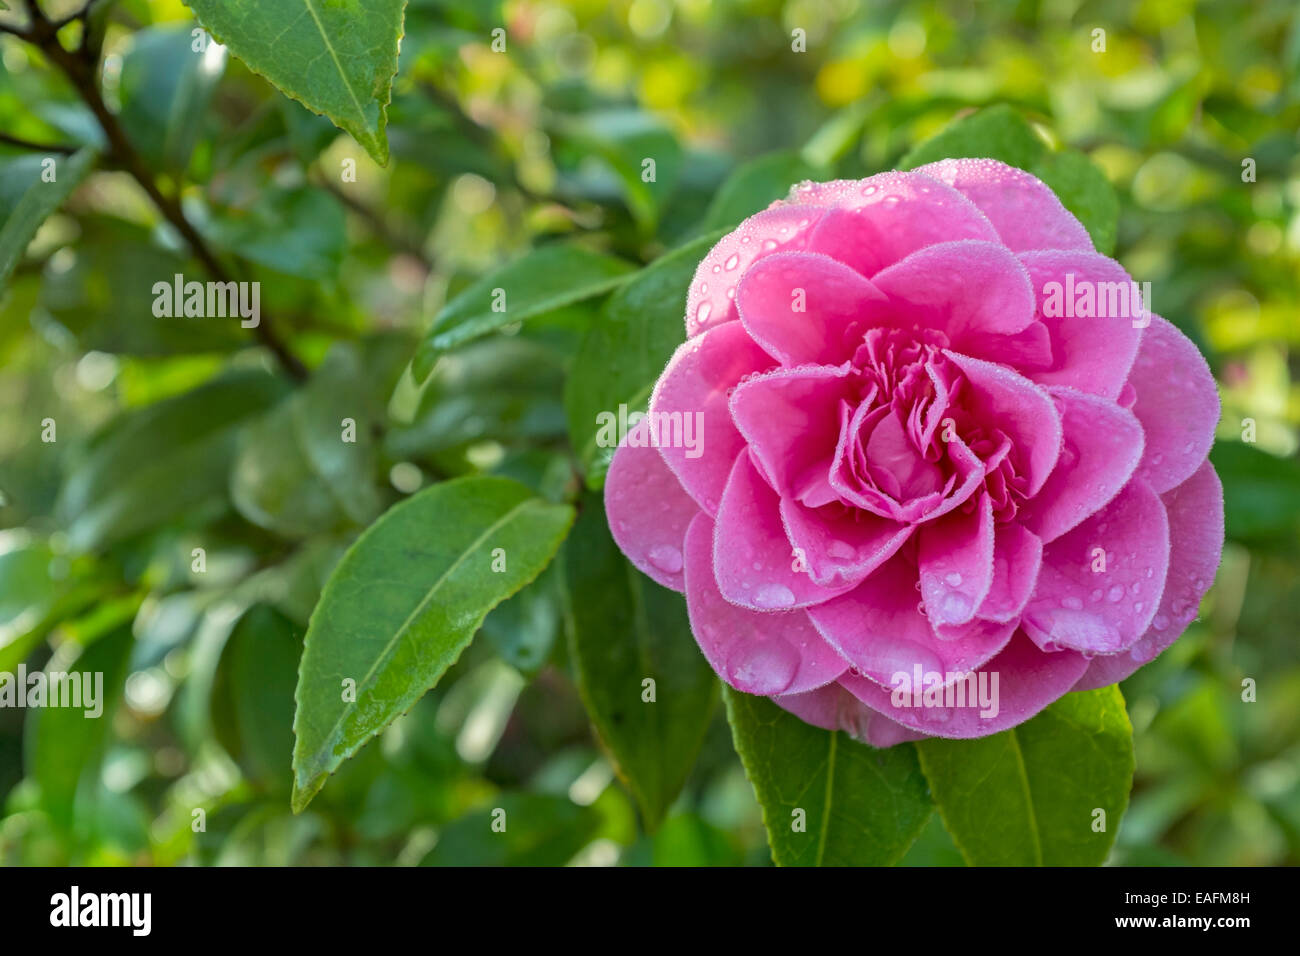 Pink Camellia flower. Stock Photo